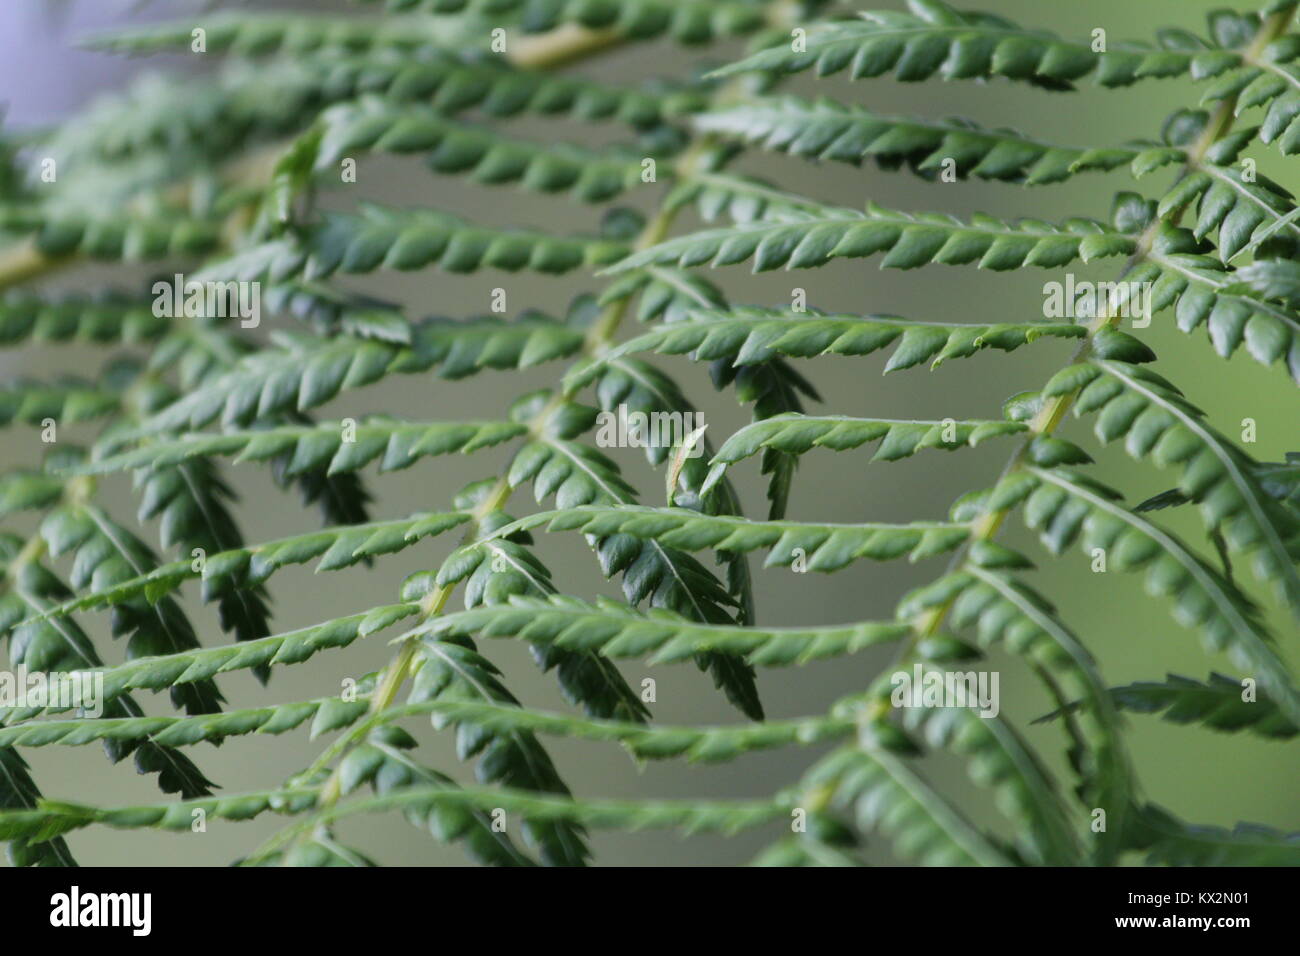 Fern leaves and patterns Stock Photo